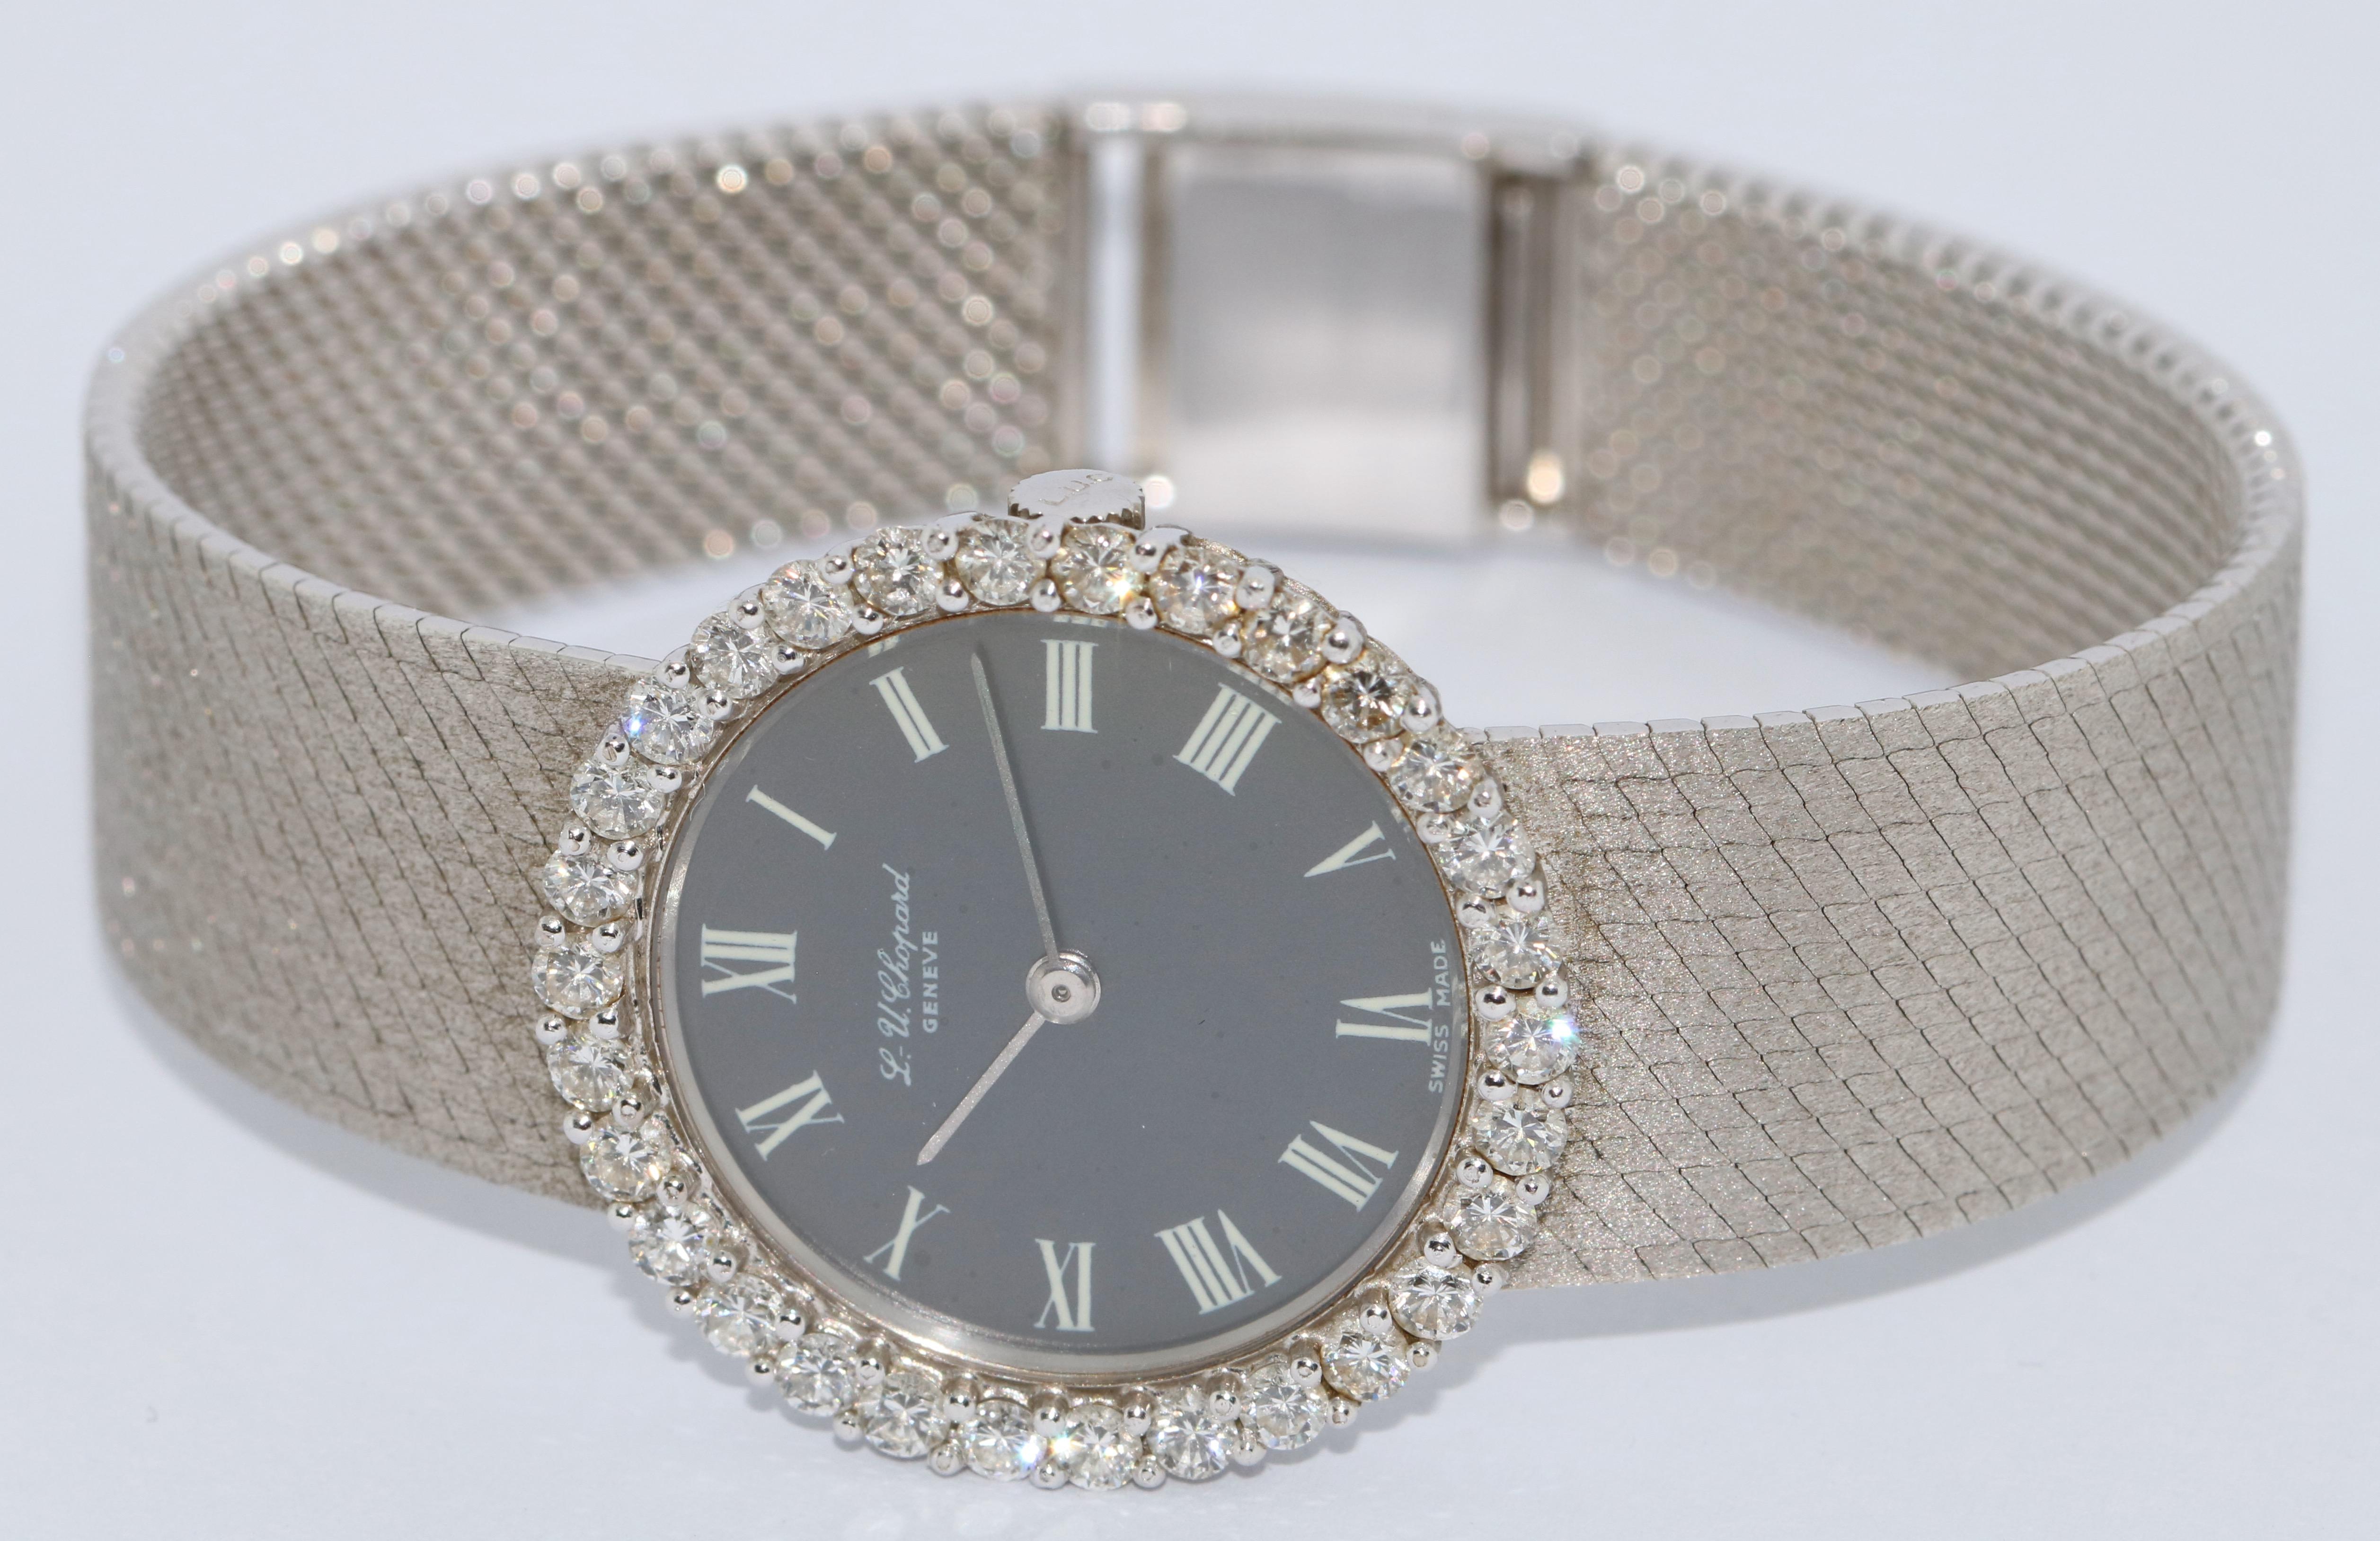 Very flat and wonderful Chopard ladies watch. Strap and case made of 18 Karat, 750 white gold.

Set with 30 diamonds in TOP quality with a total weight of approx. 1.5 carat.

Anthracite dial. Manual winding movement.

Including certificate of